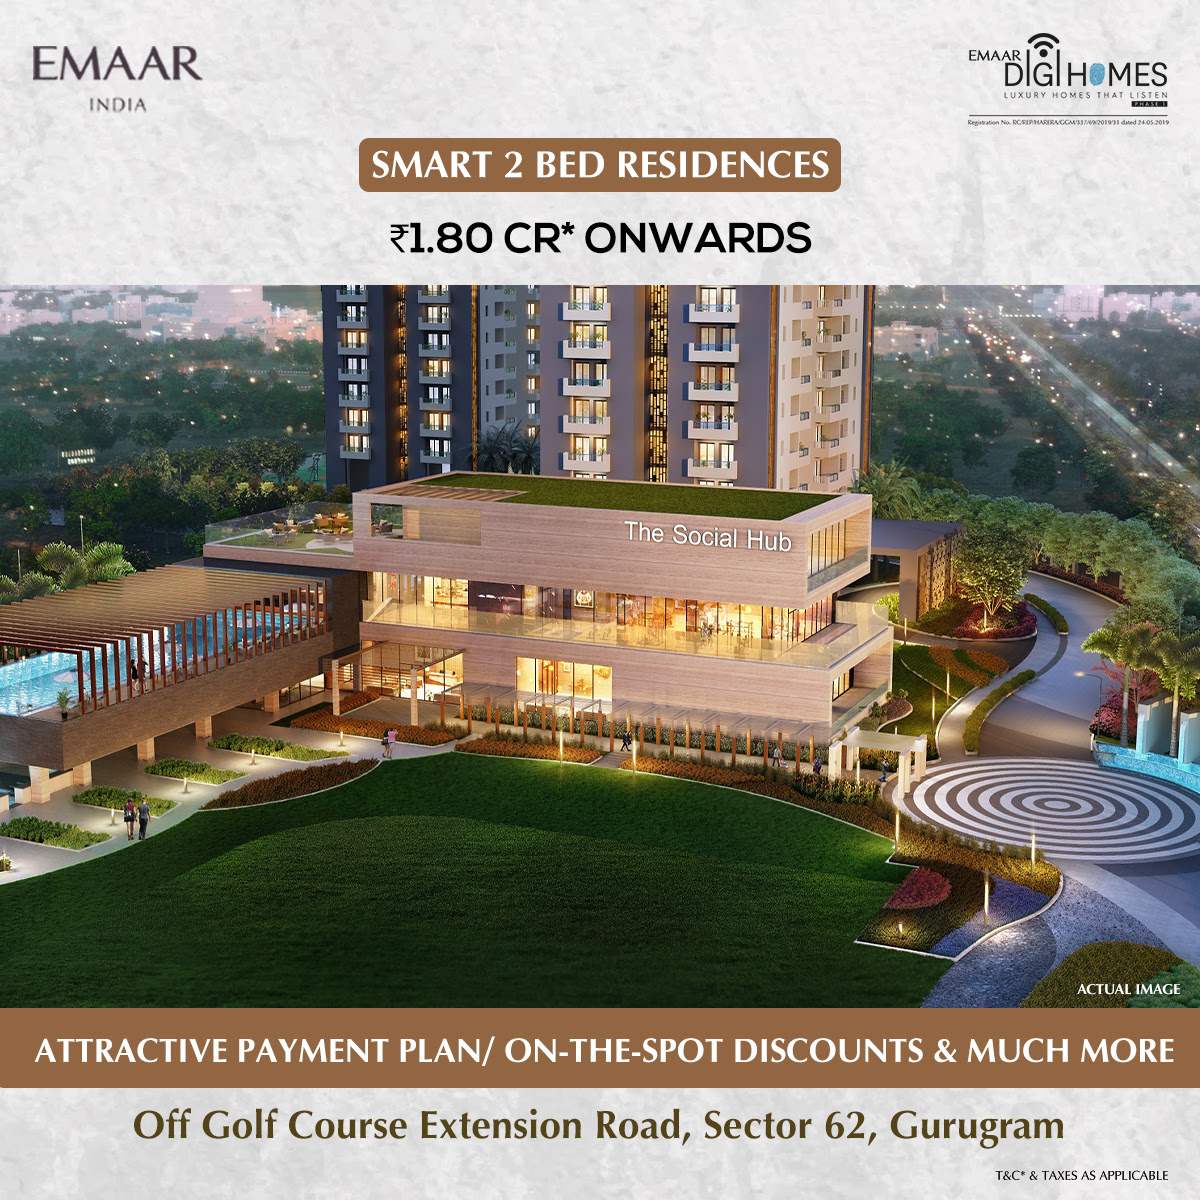 Superstructure ready special price on limited unit at Emaar Digi Homes in Sector 62, Gurgaon